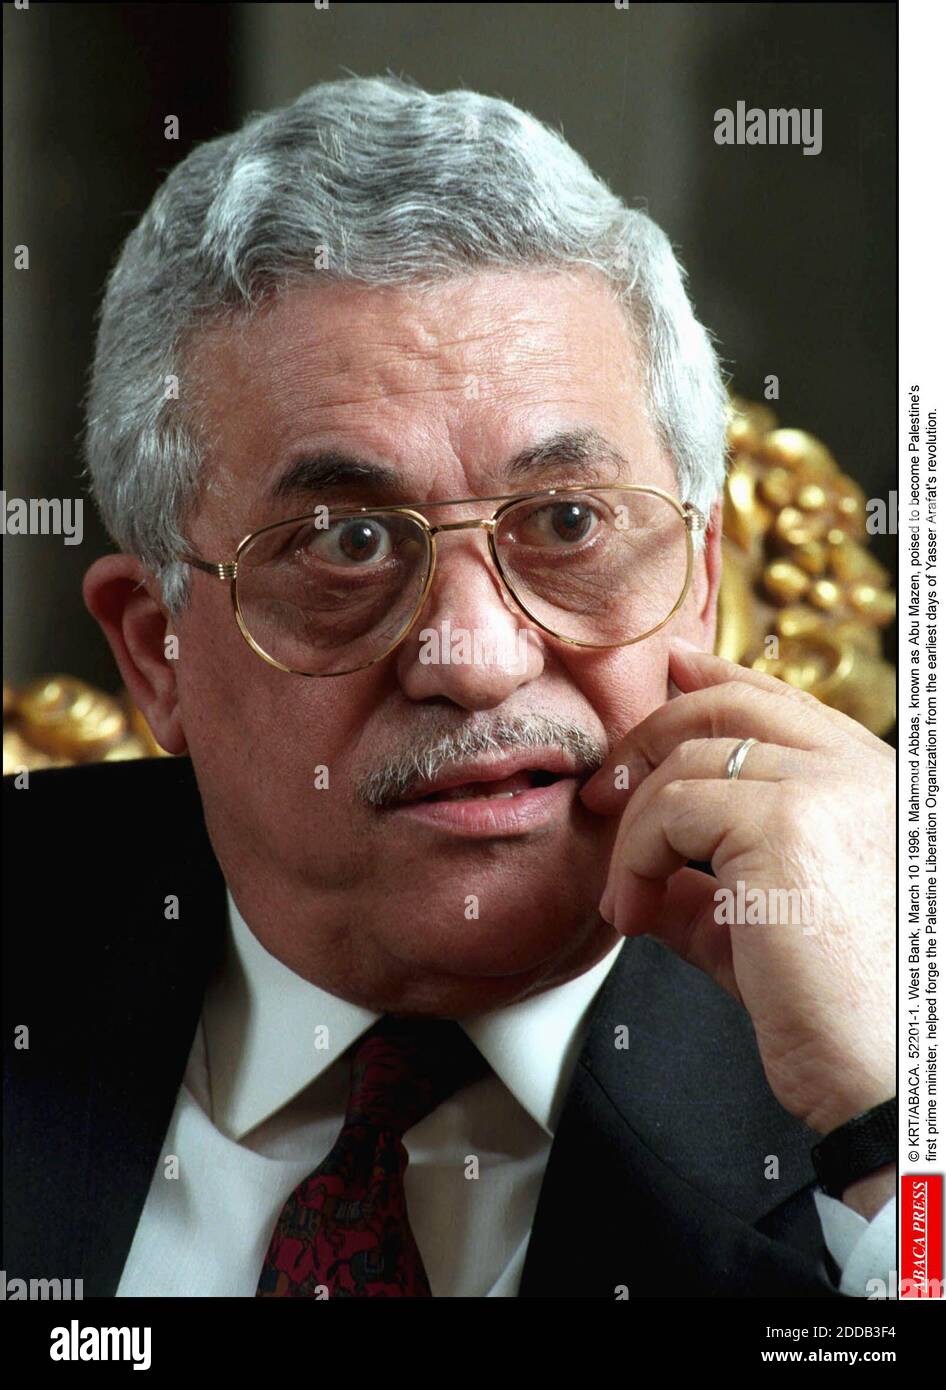 NO FILM, NO VIDEO, NO TV, NO DOCUMENTARY - © KRT/ABACA. 52201-1. West Bank, March 10 1996. Mahmoud Abbas, known as Abu Mazen, poised to become Palestine's first prime minister, helped forge the Palestine Liberation Organization from the earliest days of Yasser Arafat's revolution. Stock Photo